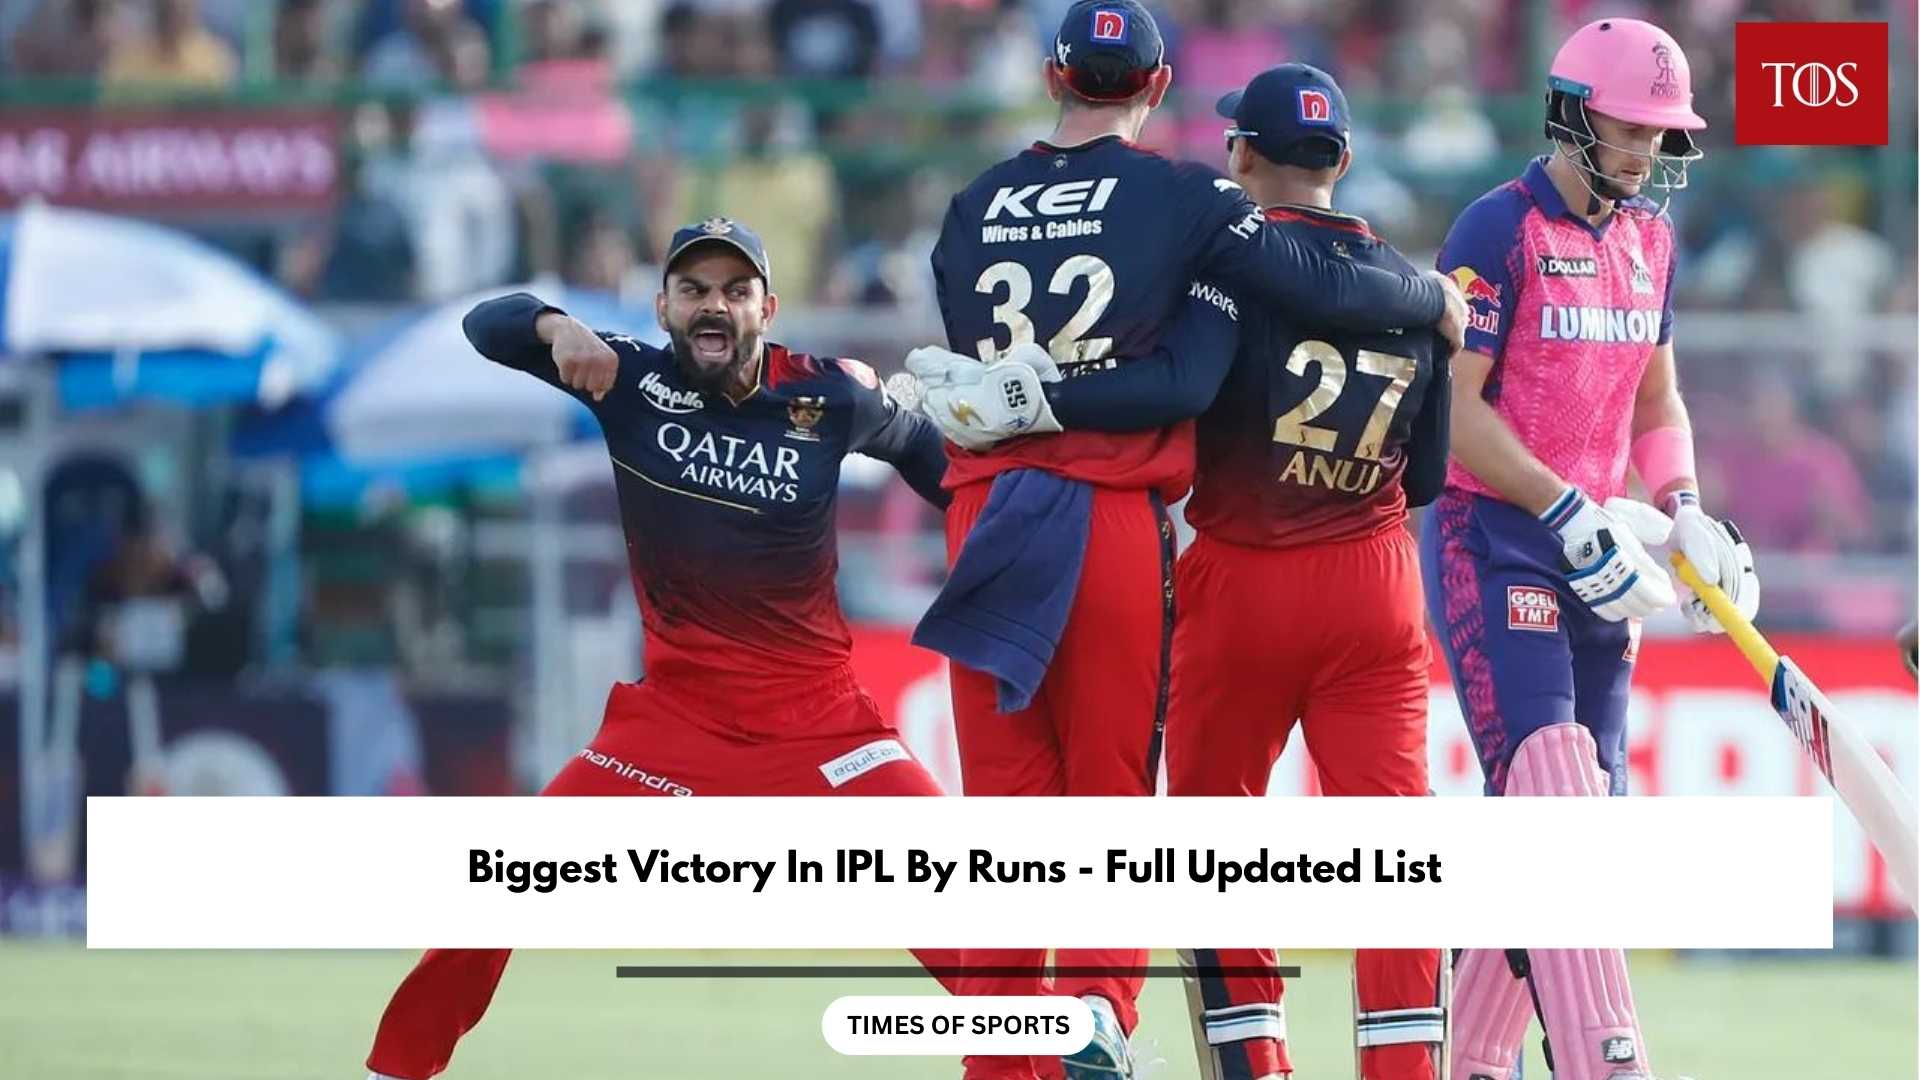 Biggest Victory In IPL By Runs